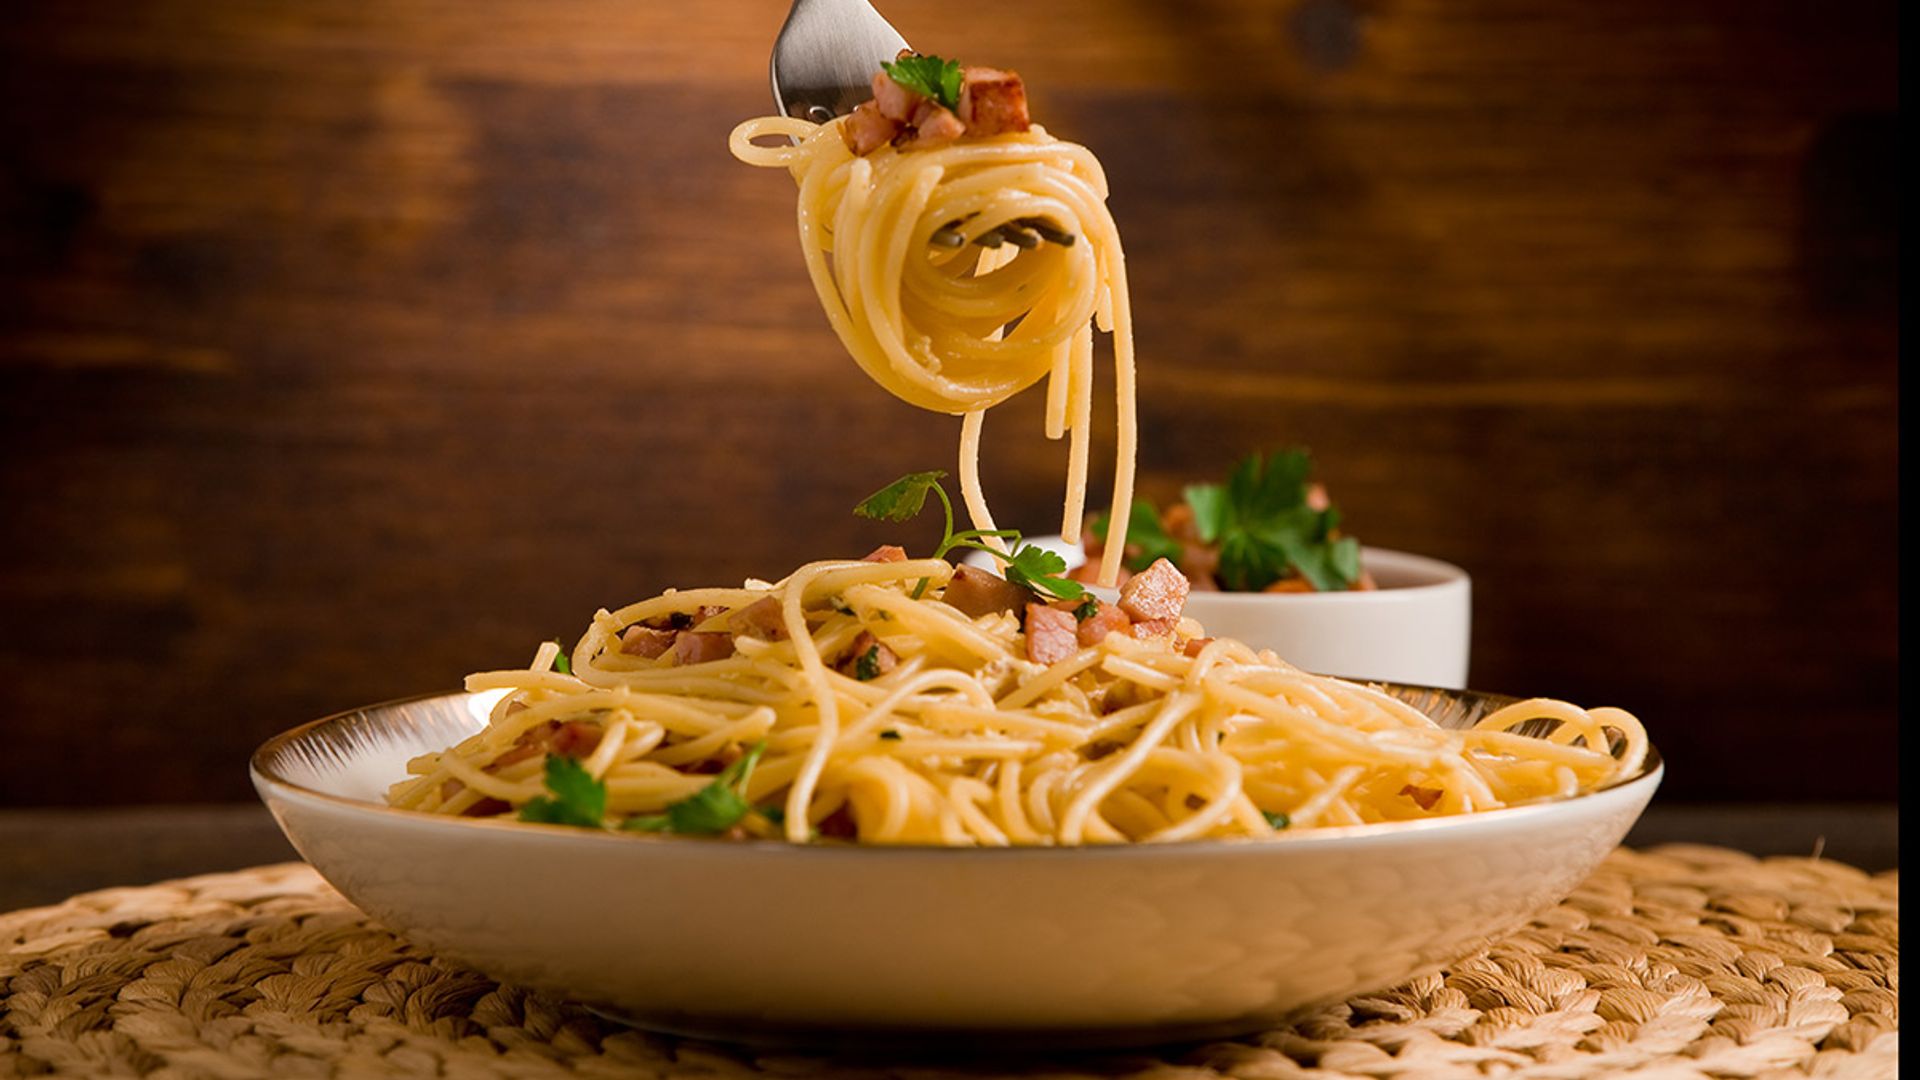 Spoon or no spoon for spaghetti? A top etiquette coach reveals the CORRECT way to eat pasta